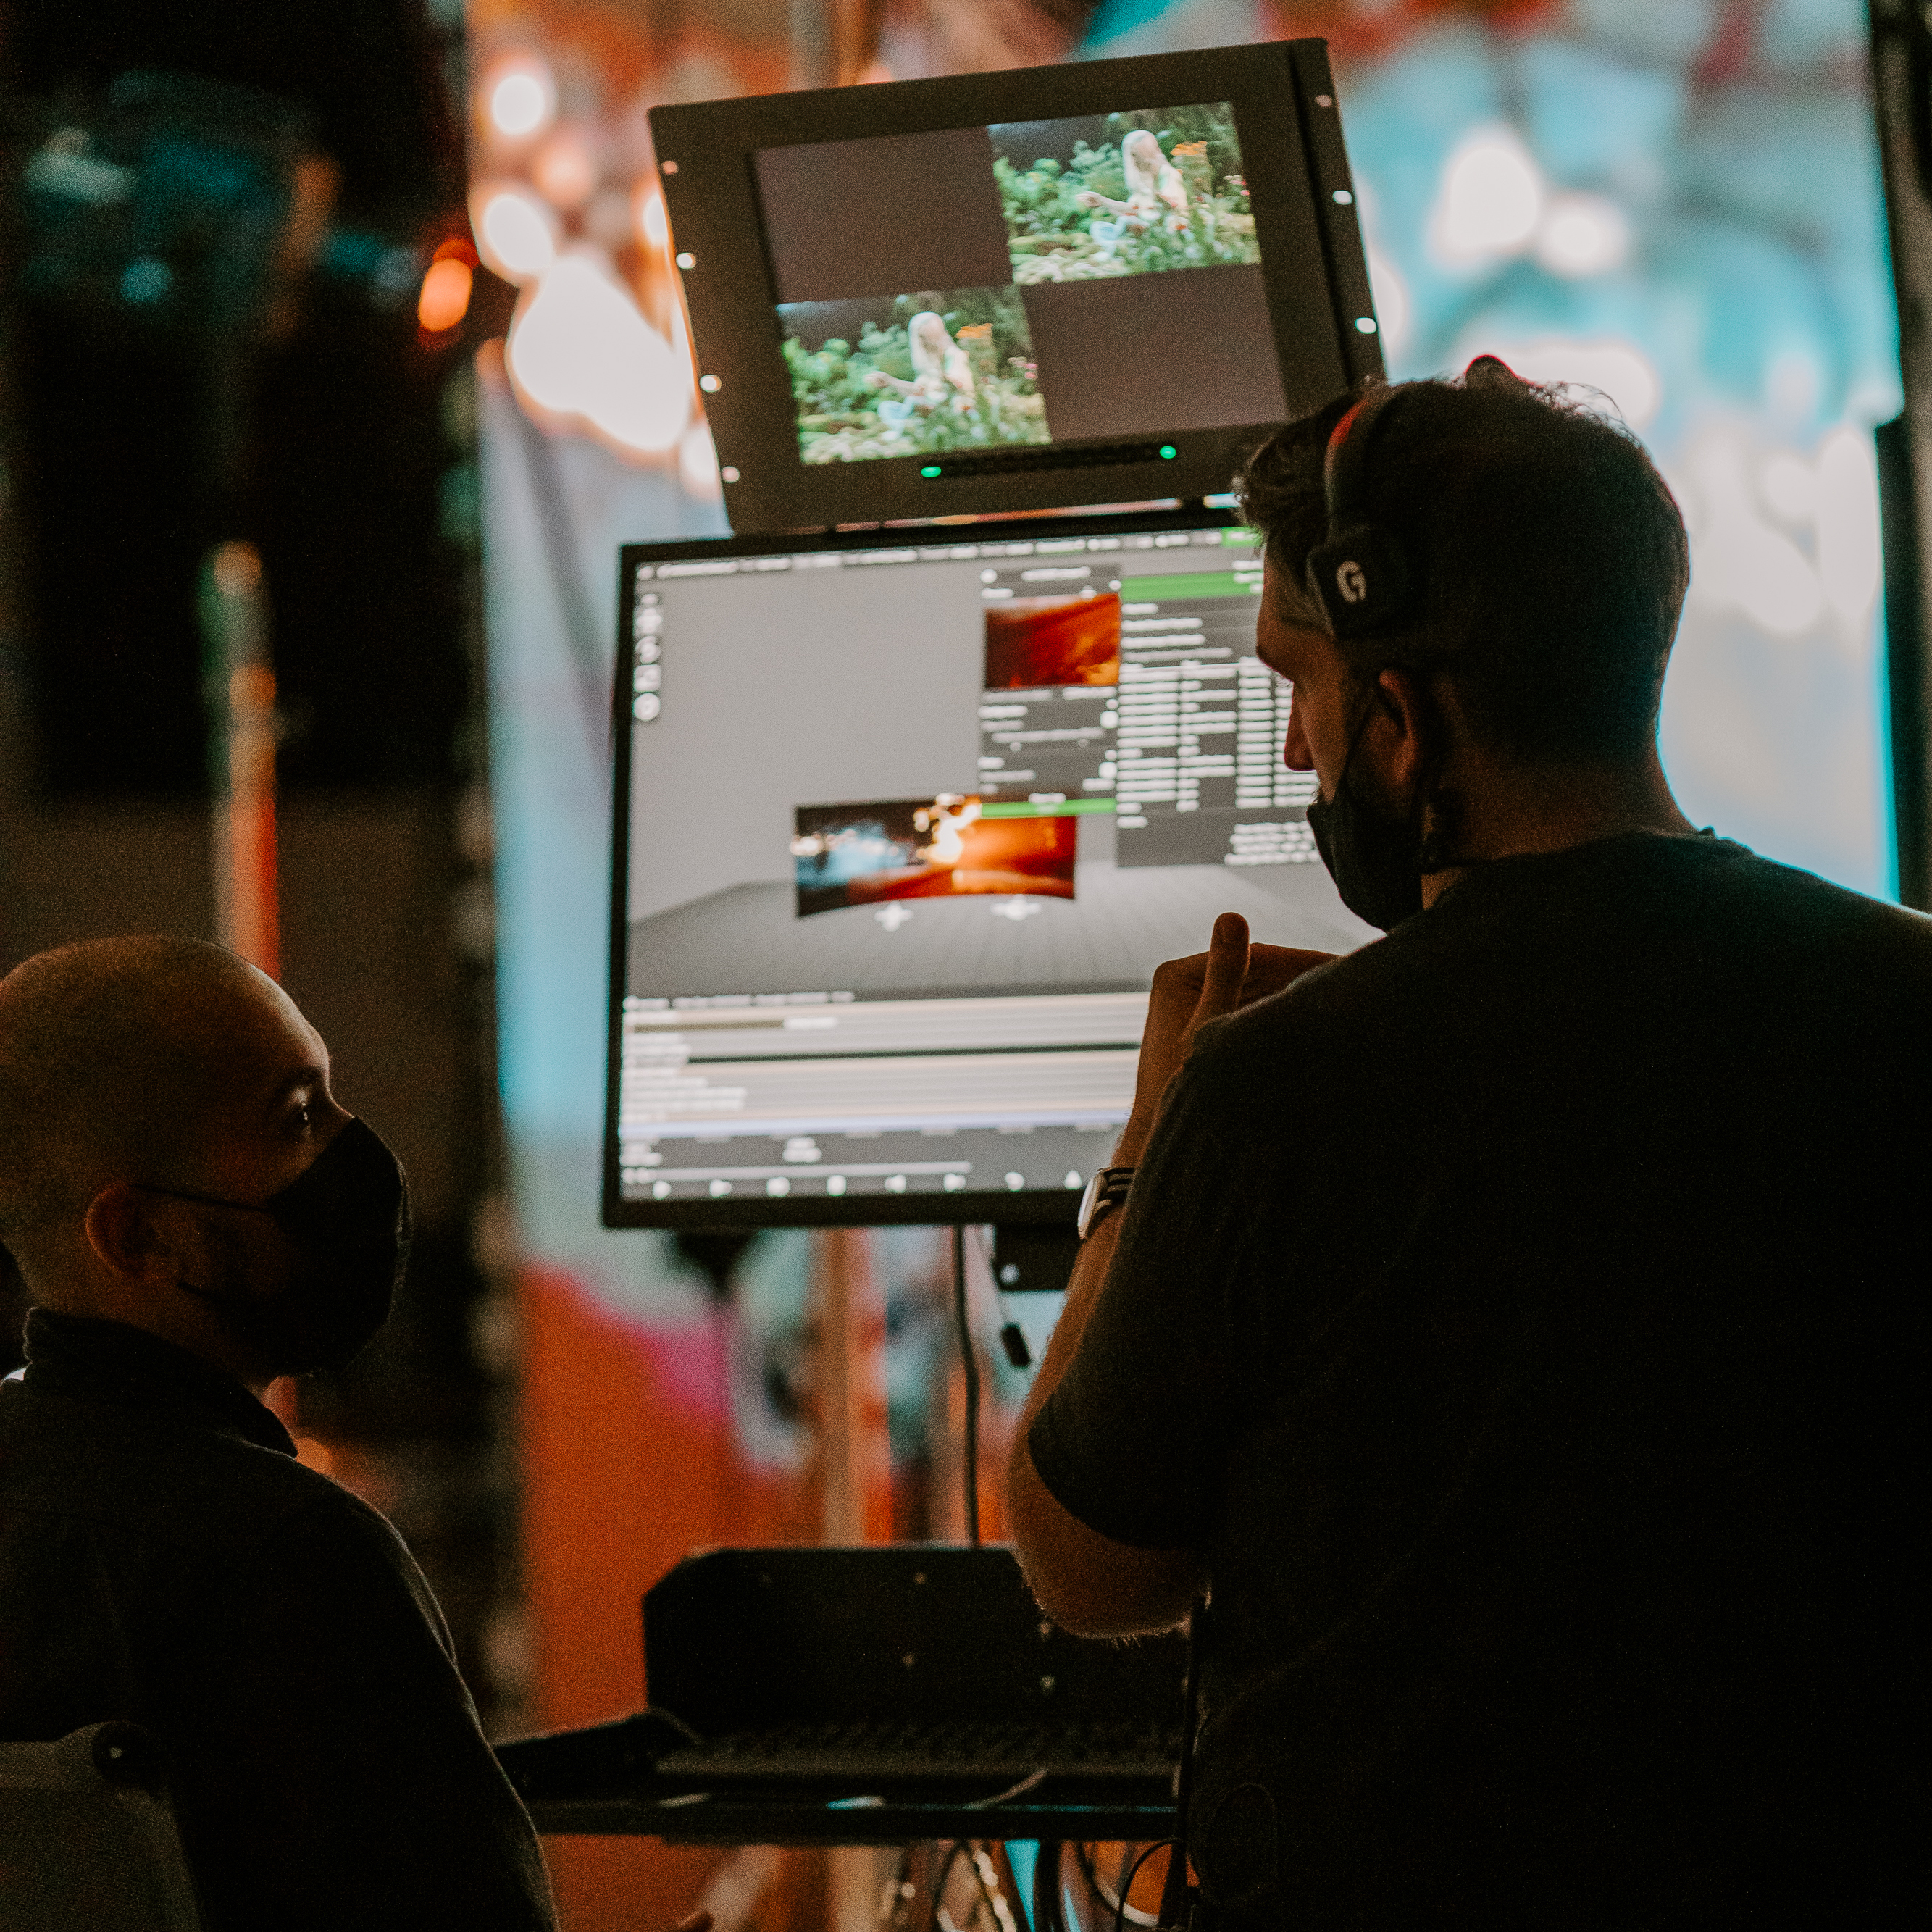 We’re constantly working behind the scenes to define what’s next in virtual production and real-time content for our clients’ music videos, film, events, corporate projects and more